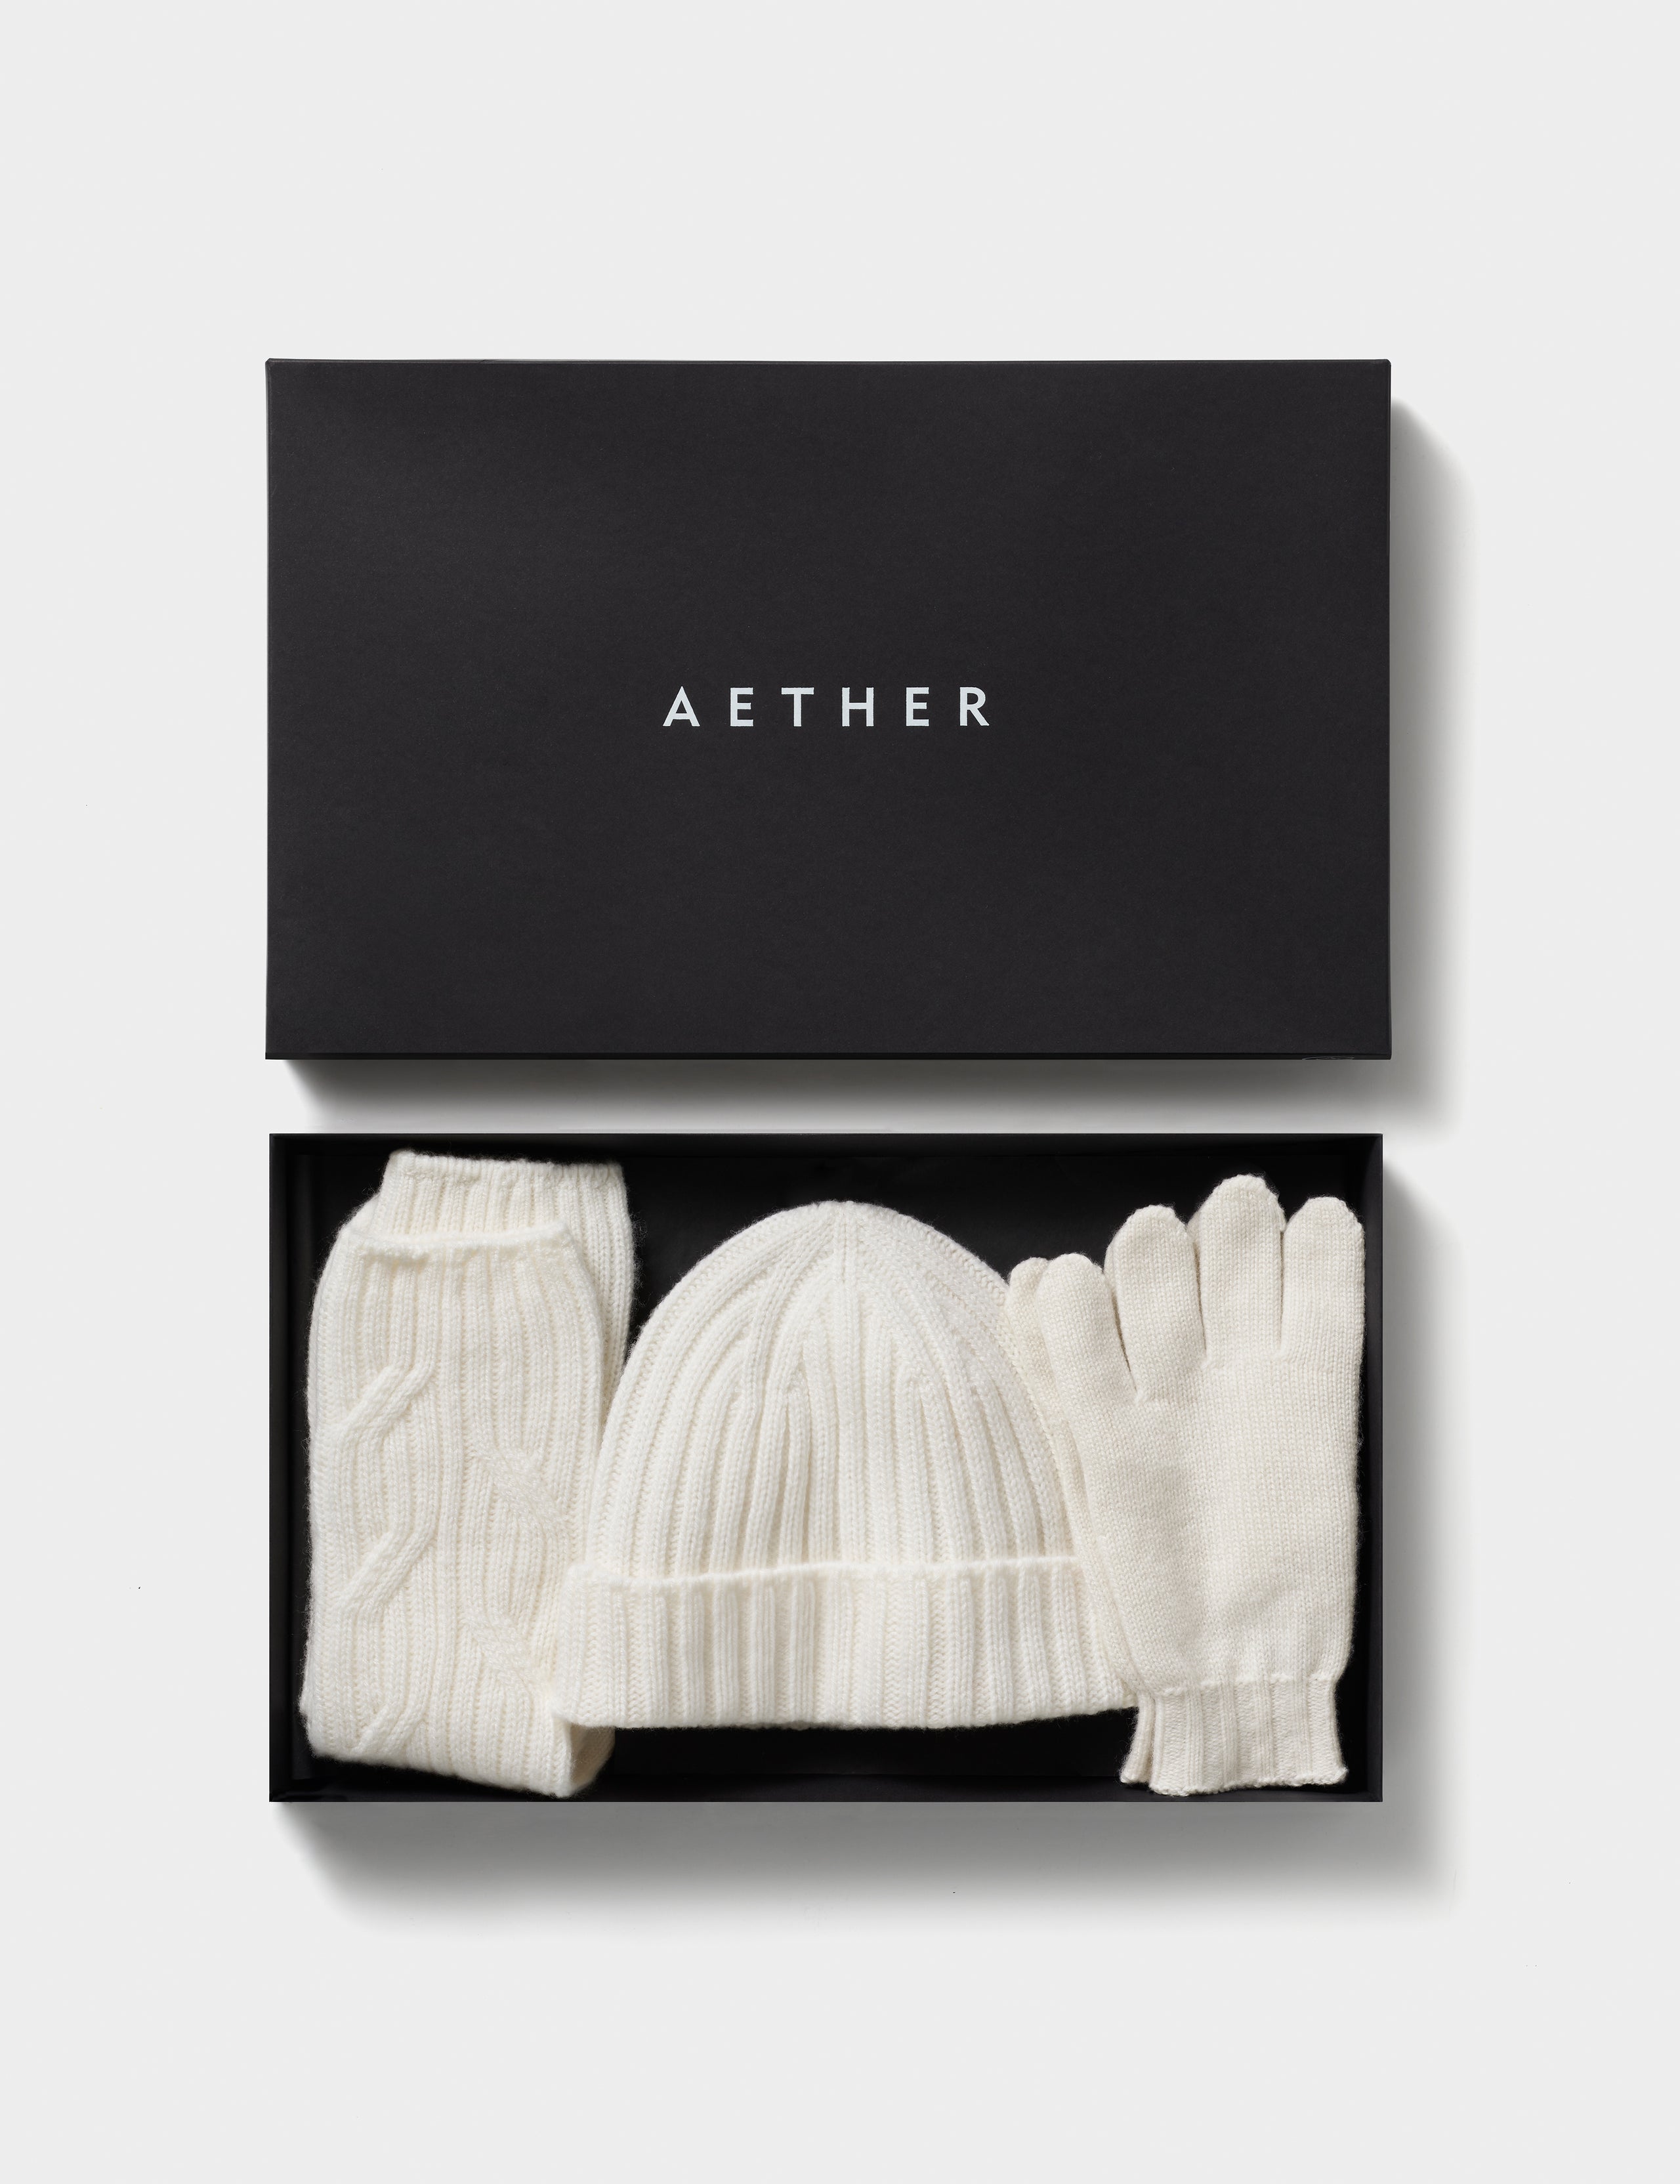 White cashmere hat, socks, and gloves from AETHER Apparel